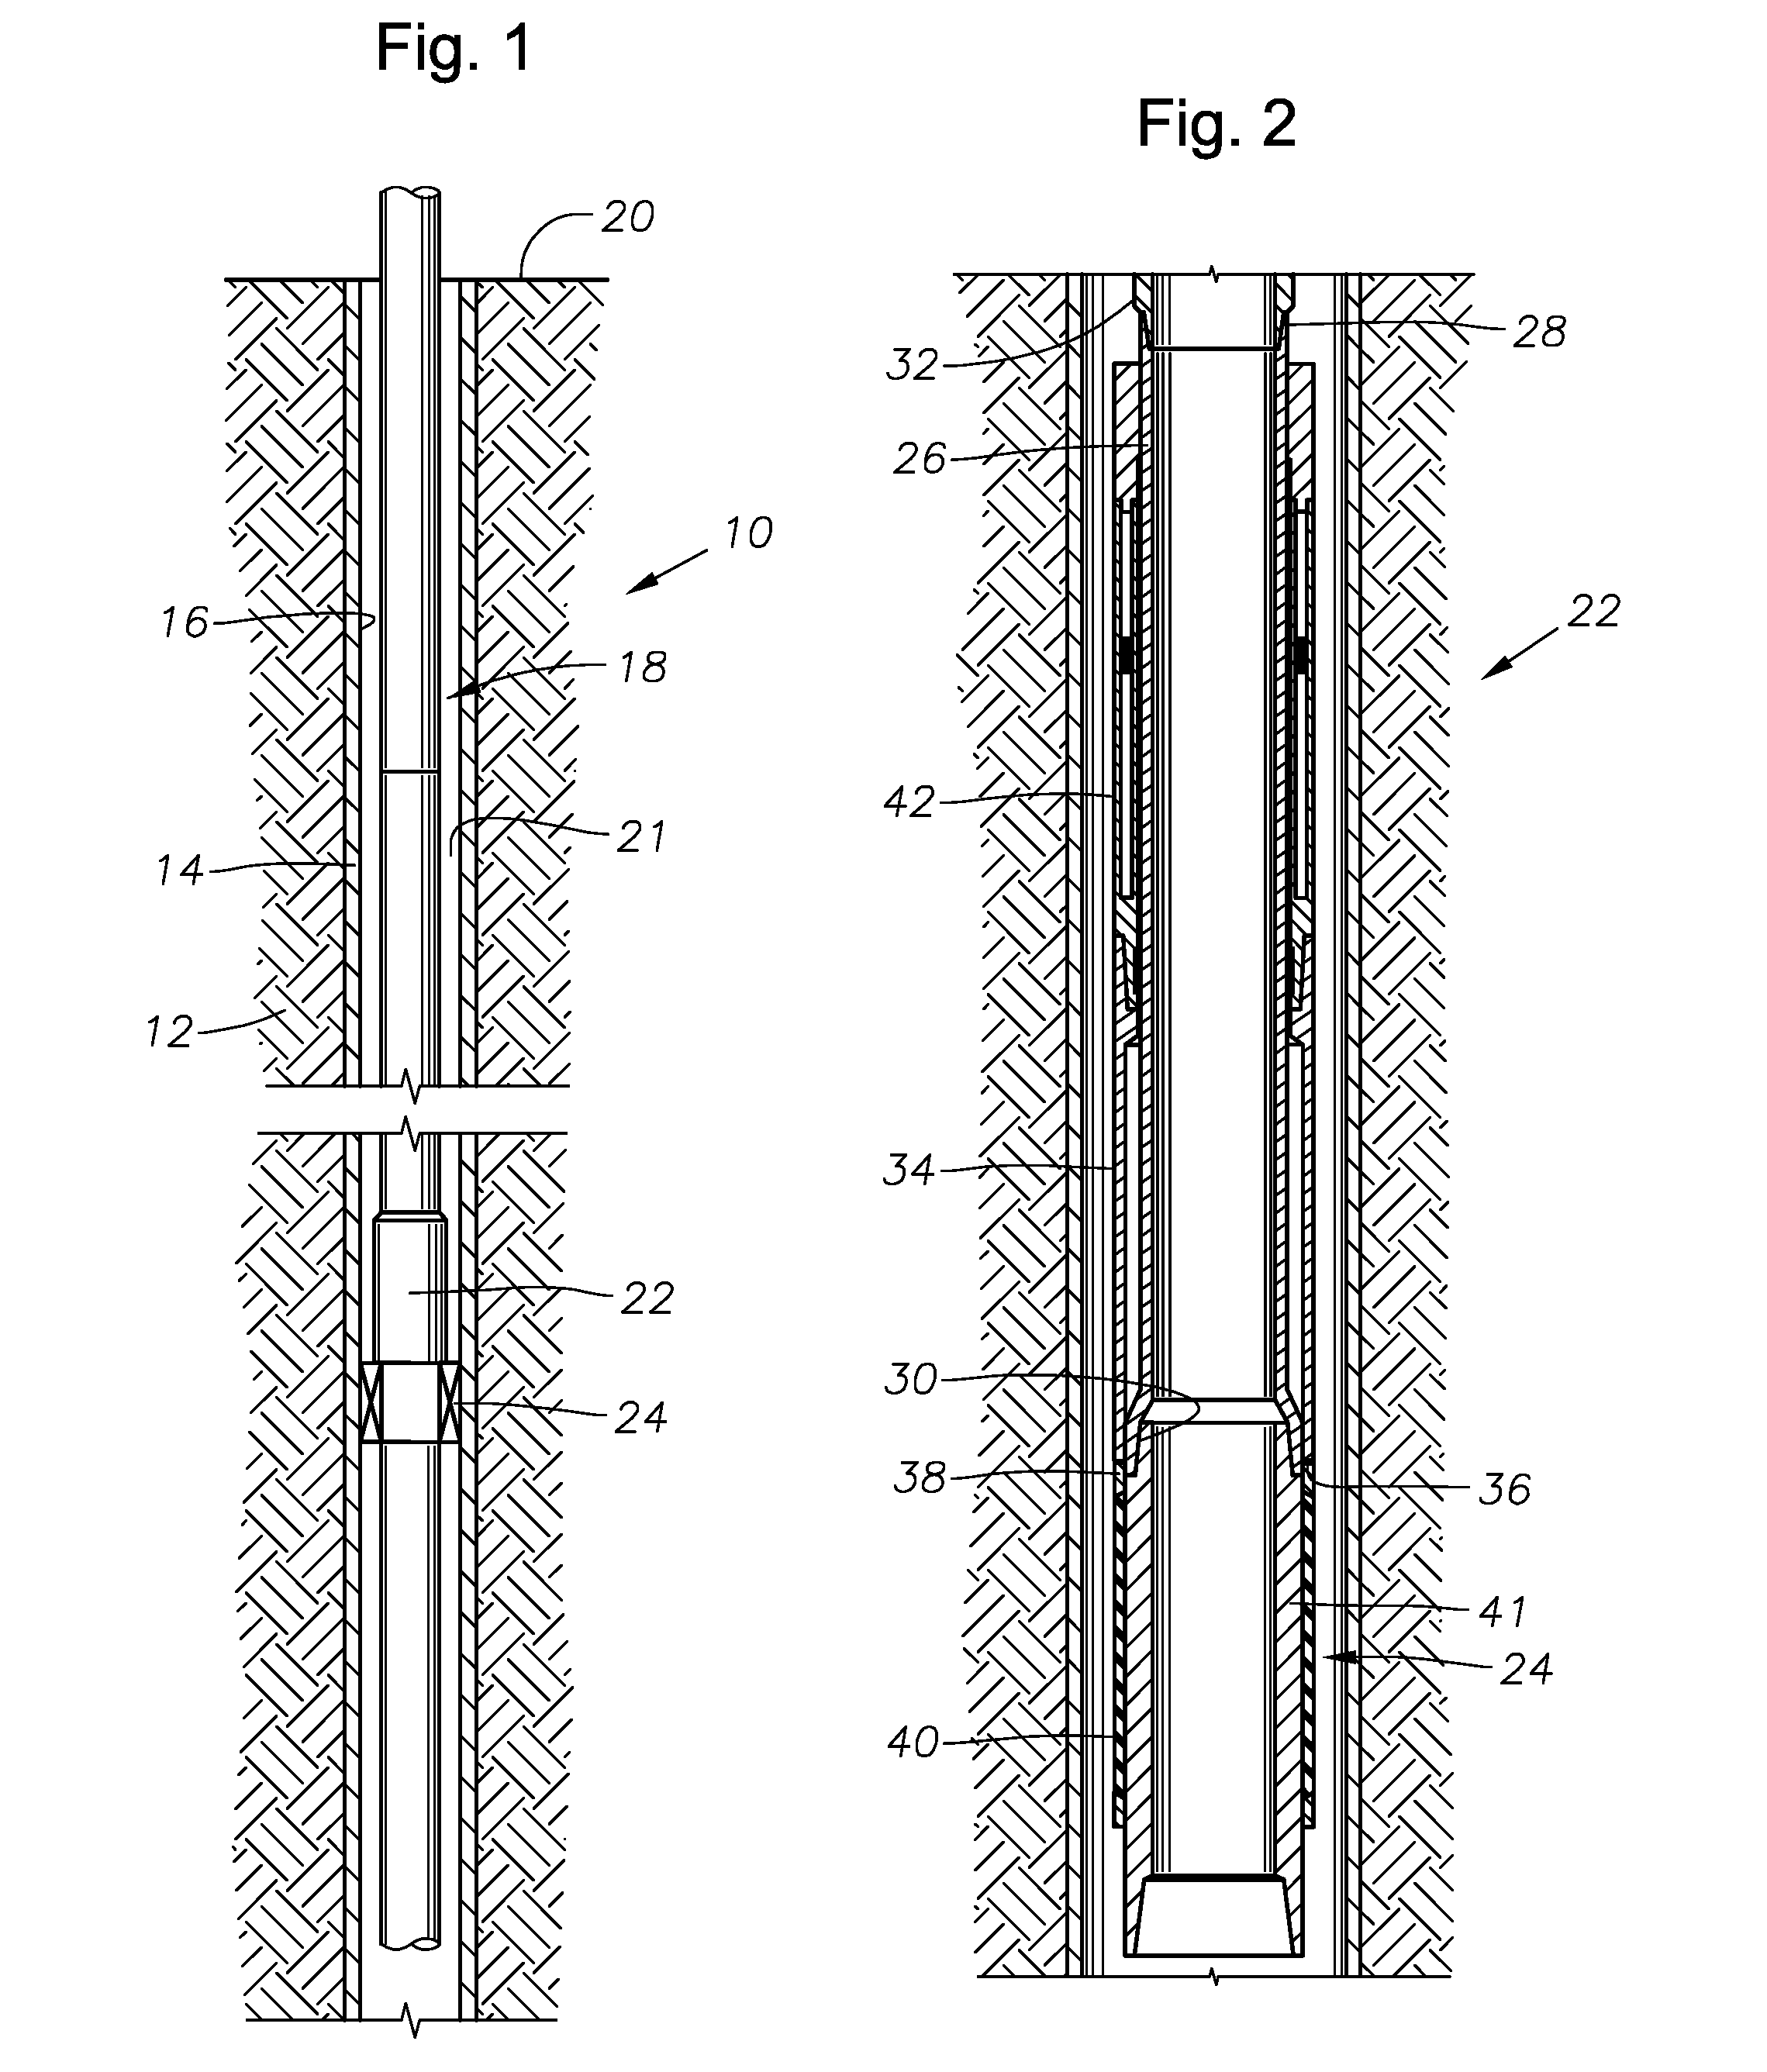 Packer setting device for high-hydrostatic applications